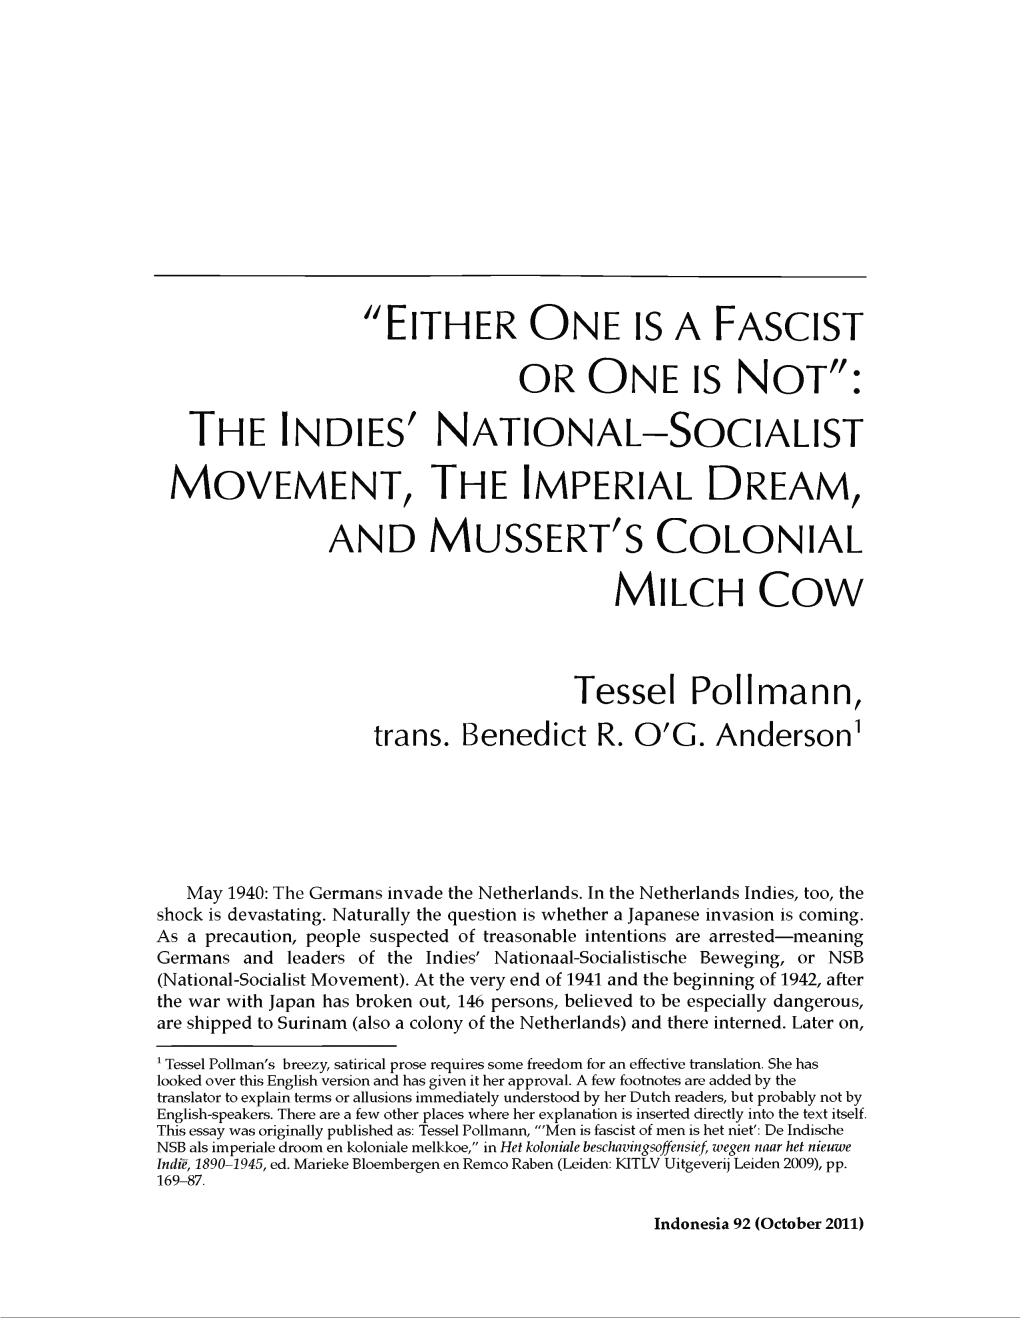 The Indies' National-Socialist Movement, the Imperial Dream, and M Ussert's Colonial M Ilch Co W